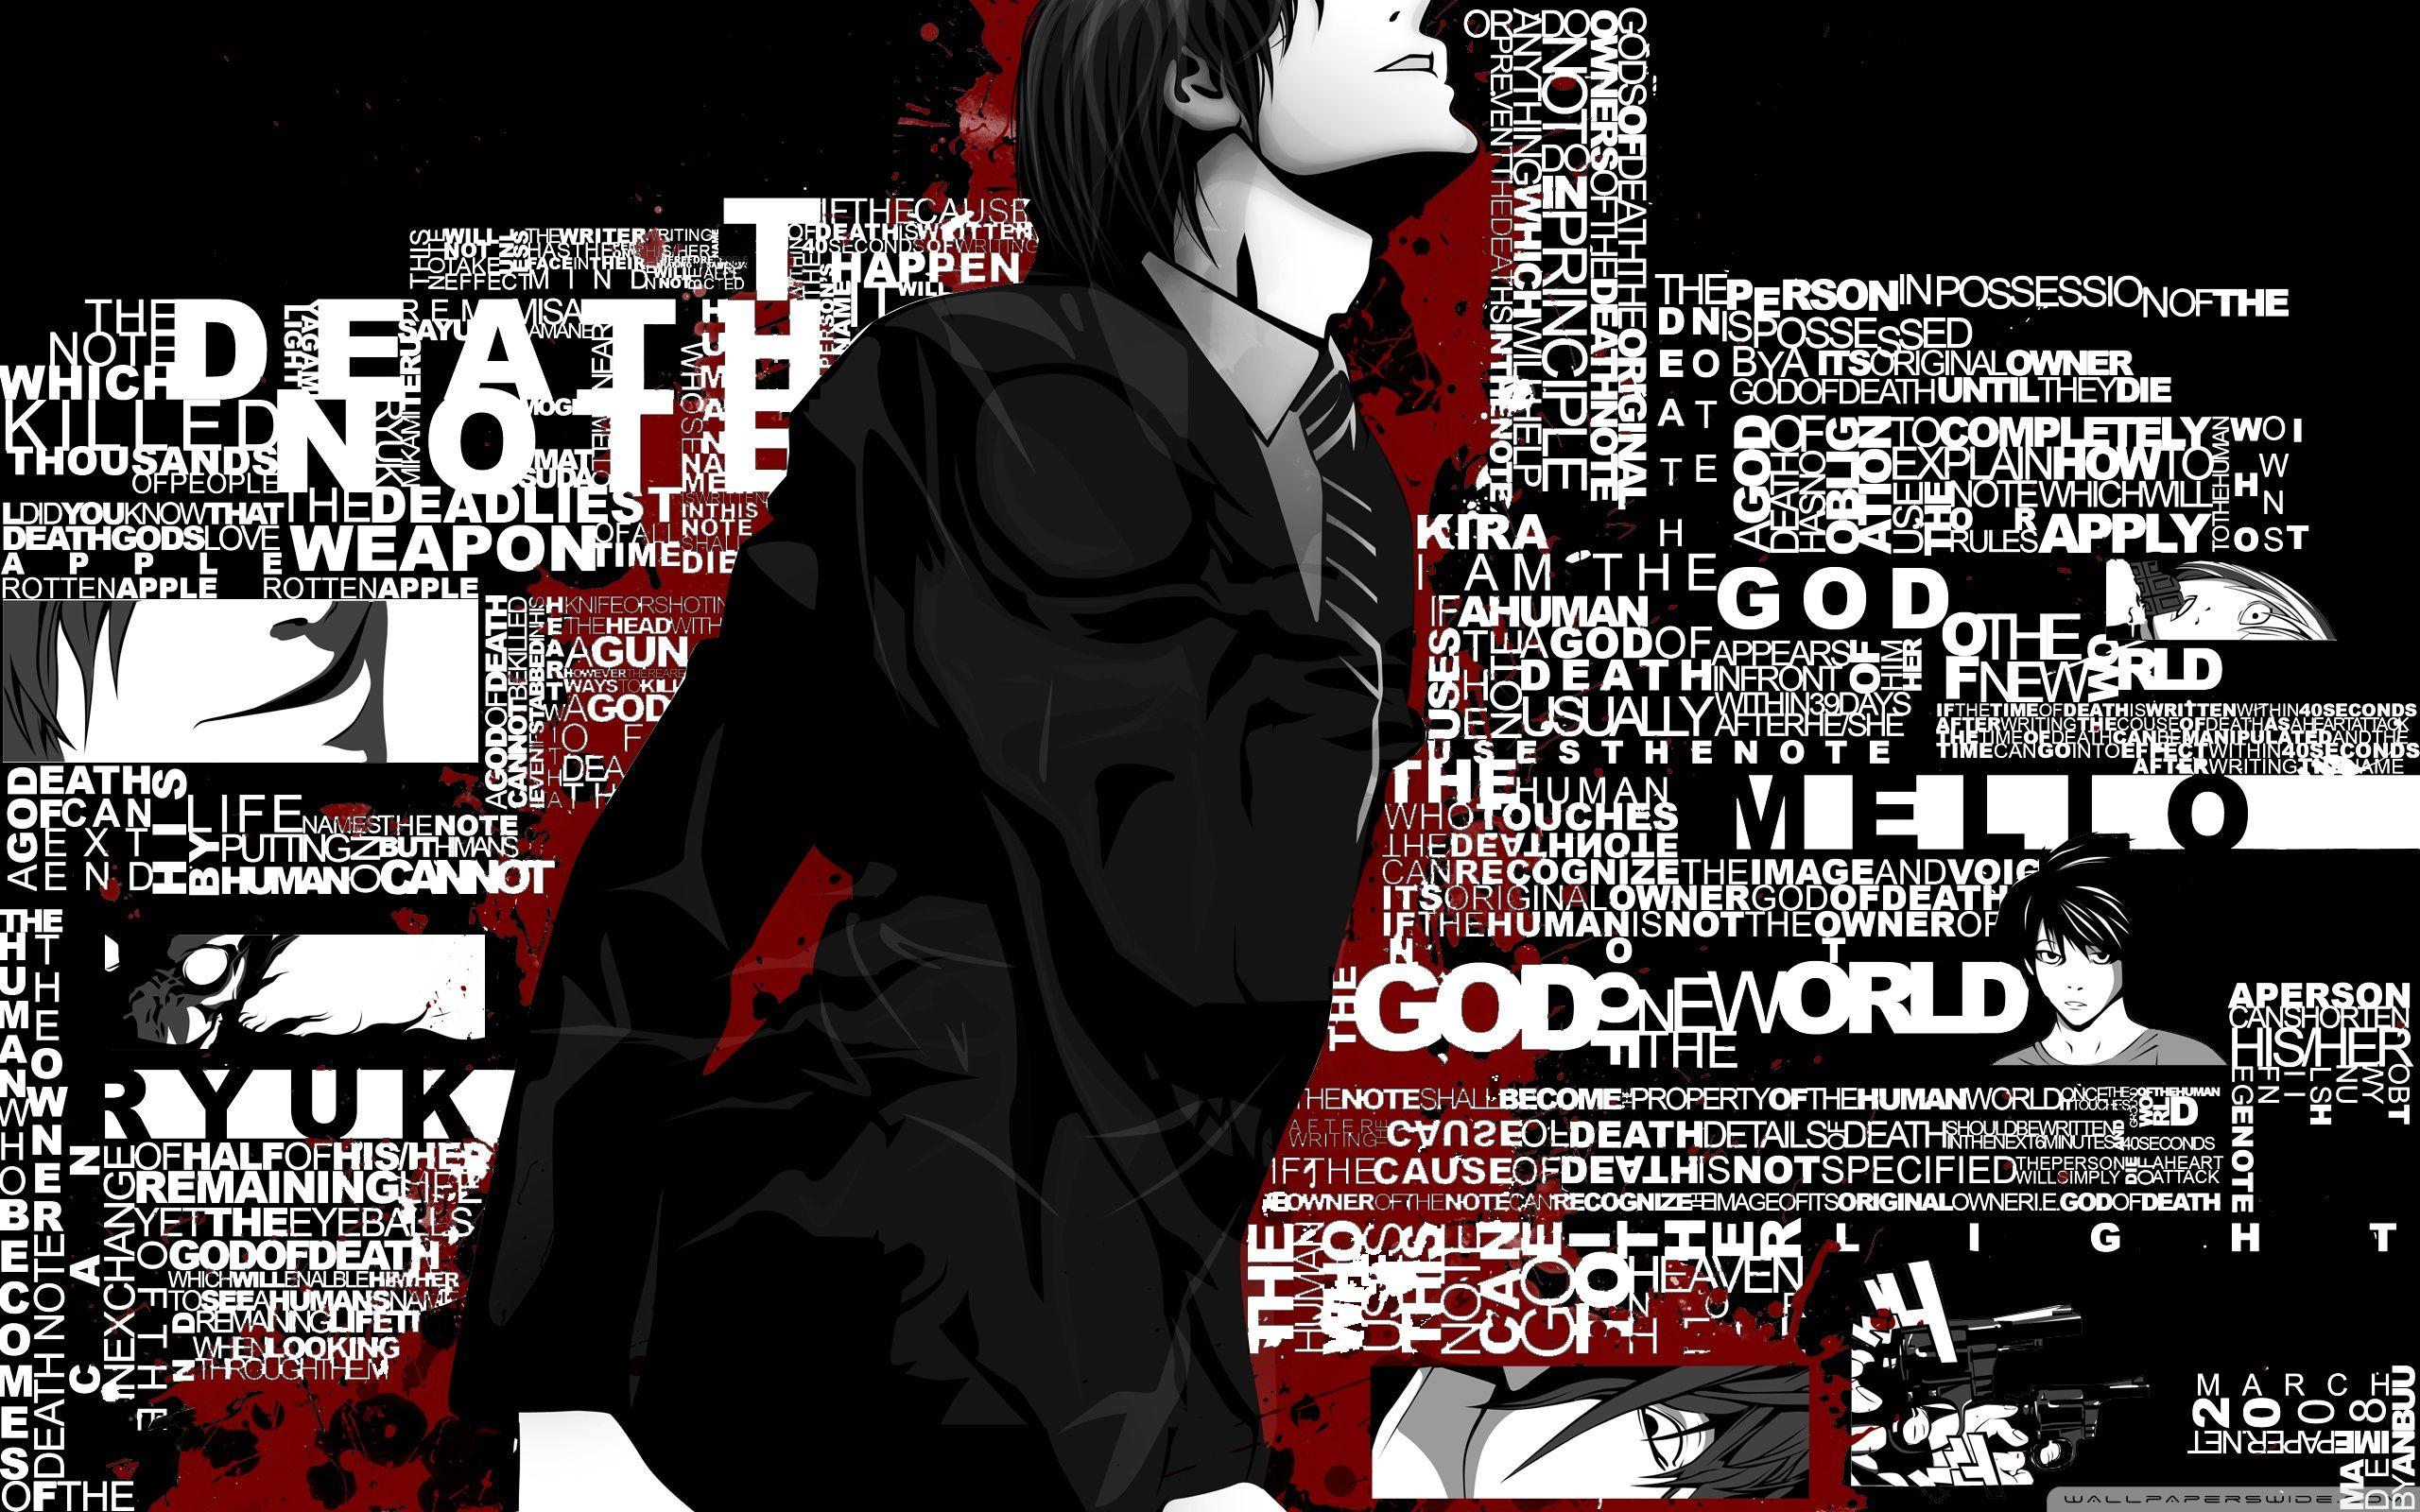 Death Note Wallpaper 01 | Anime Death Note - Yagami Light | Flickr